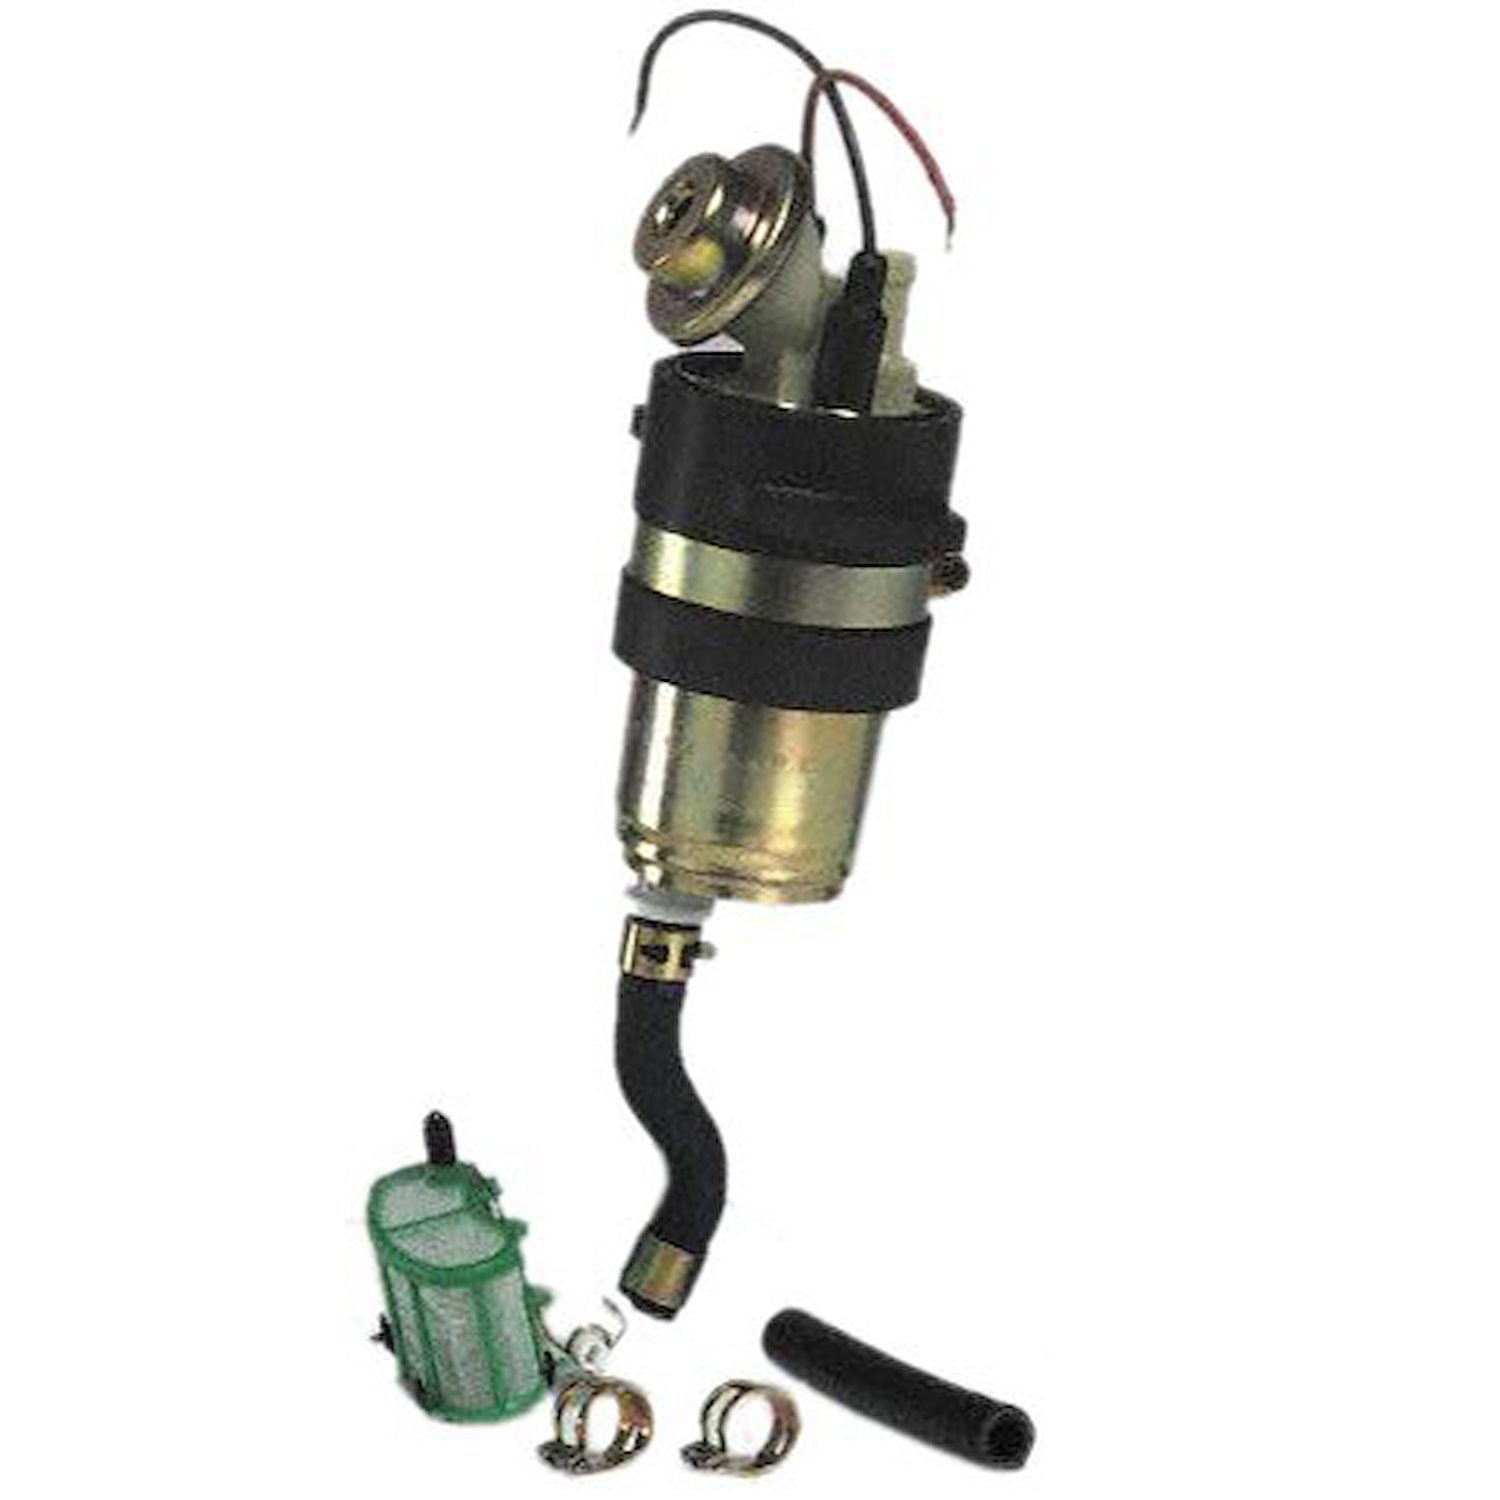 EFI In-Tank Electric Fuel Pump And Strainer Set for 1987-1995 Nissan Pathfinder